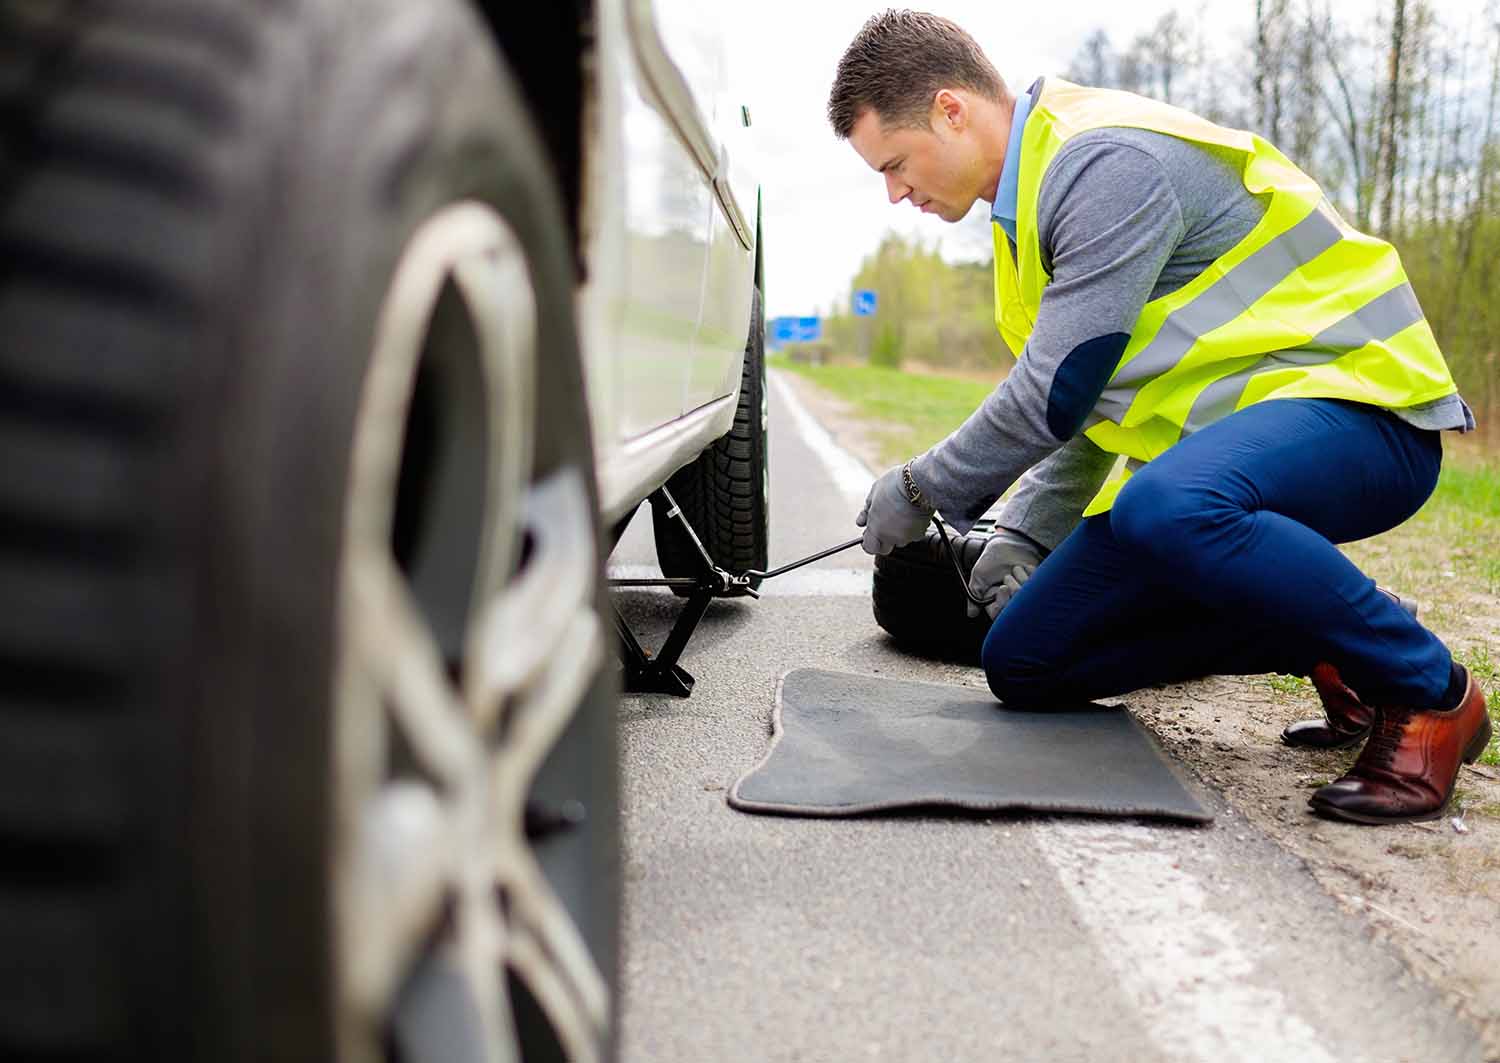 Fix-a-Flat - Be prepared for a flat tire emergency with Fix-a-Flat